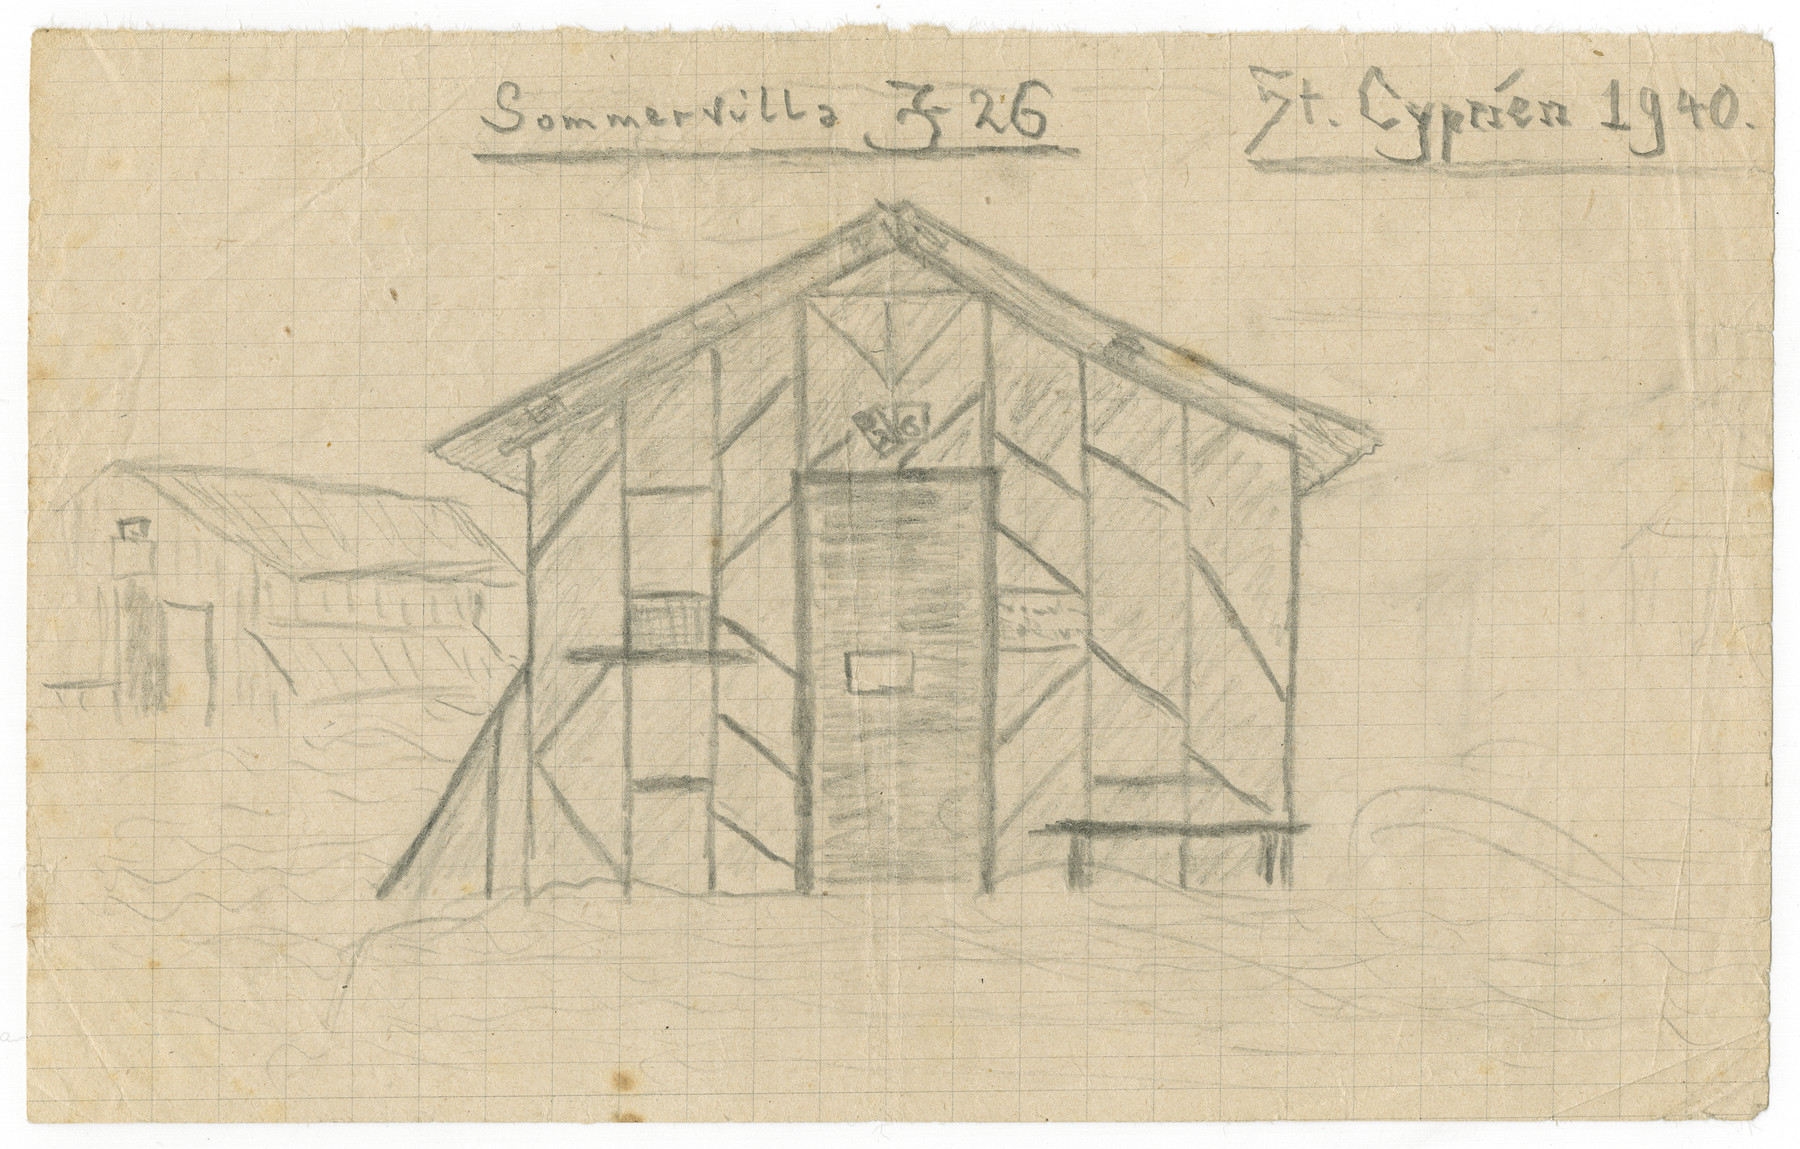 Sketch of a barrack in the Saint Cyprien internment camp drawn by Kurt Feigenbaum after he was deported from Belgium.